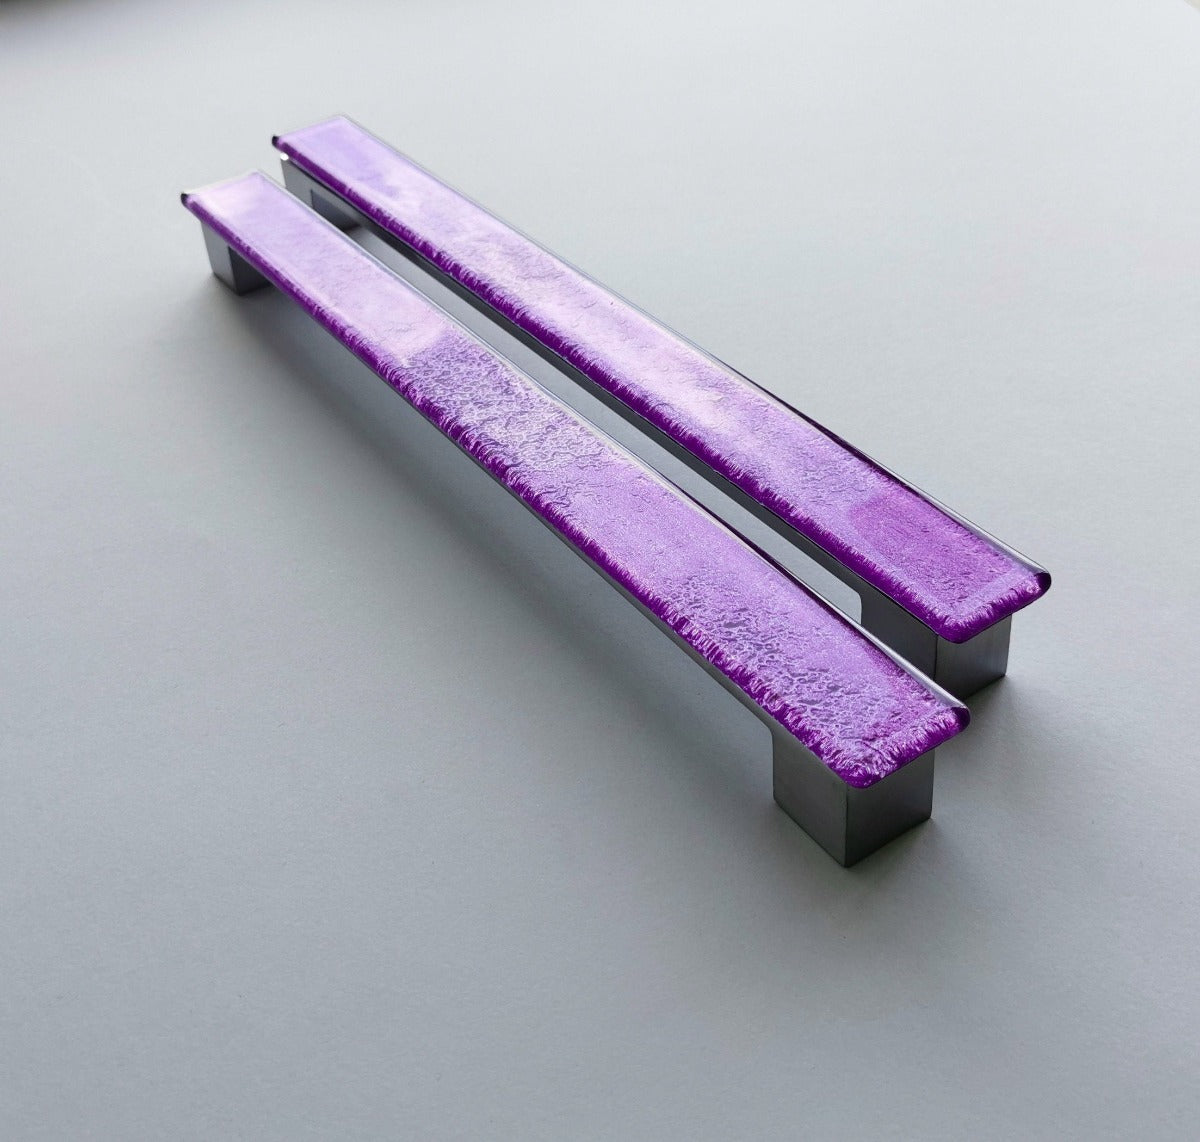 A Set of 2 Large Glass Pulls in Bright Purple. Artistic Sparkly Purple Furniture Glass Pull - 0015